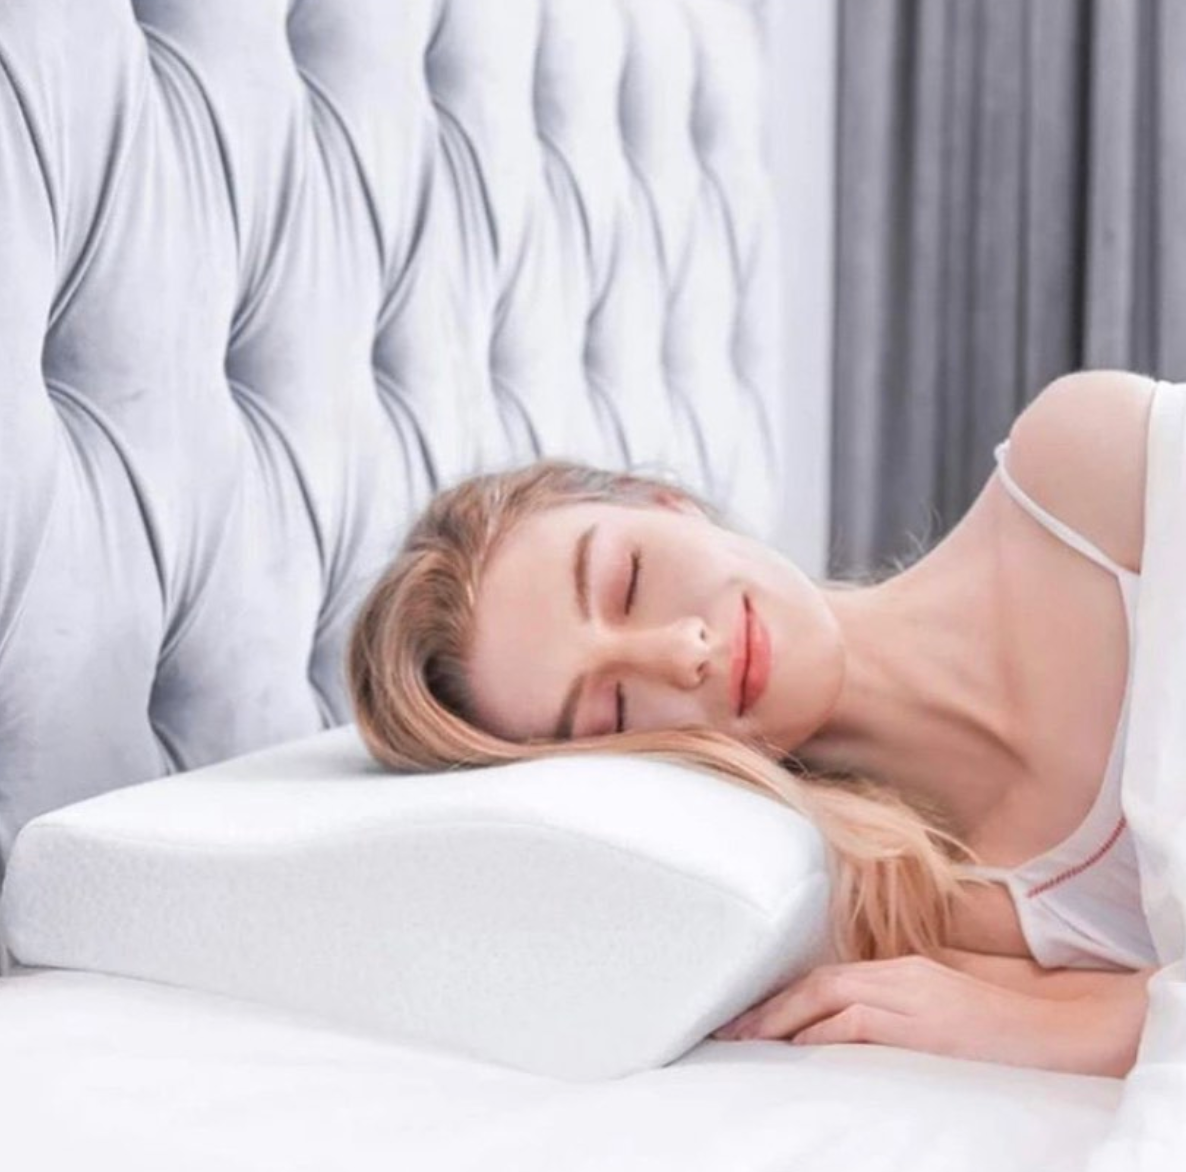 Struggling to Get a Relaxed and Comfortable Sleep? Try Changing Your Sleeping Pillow